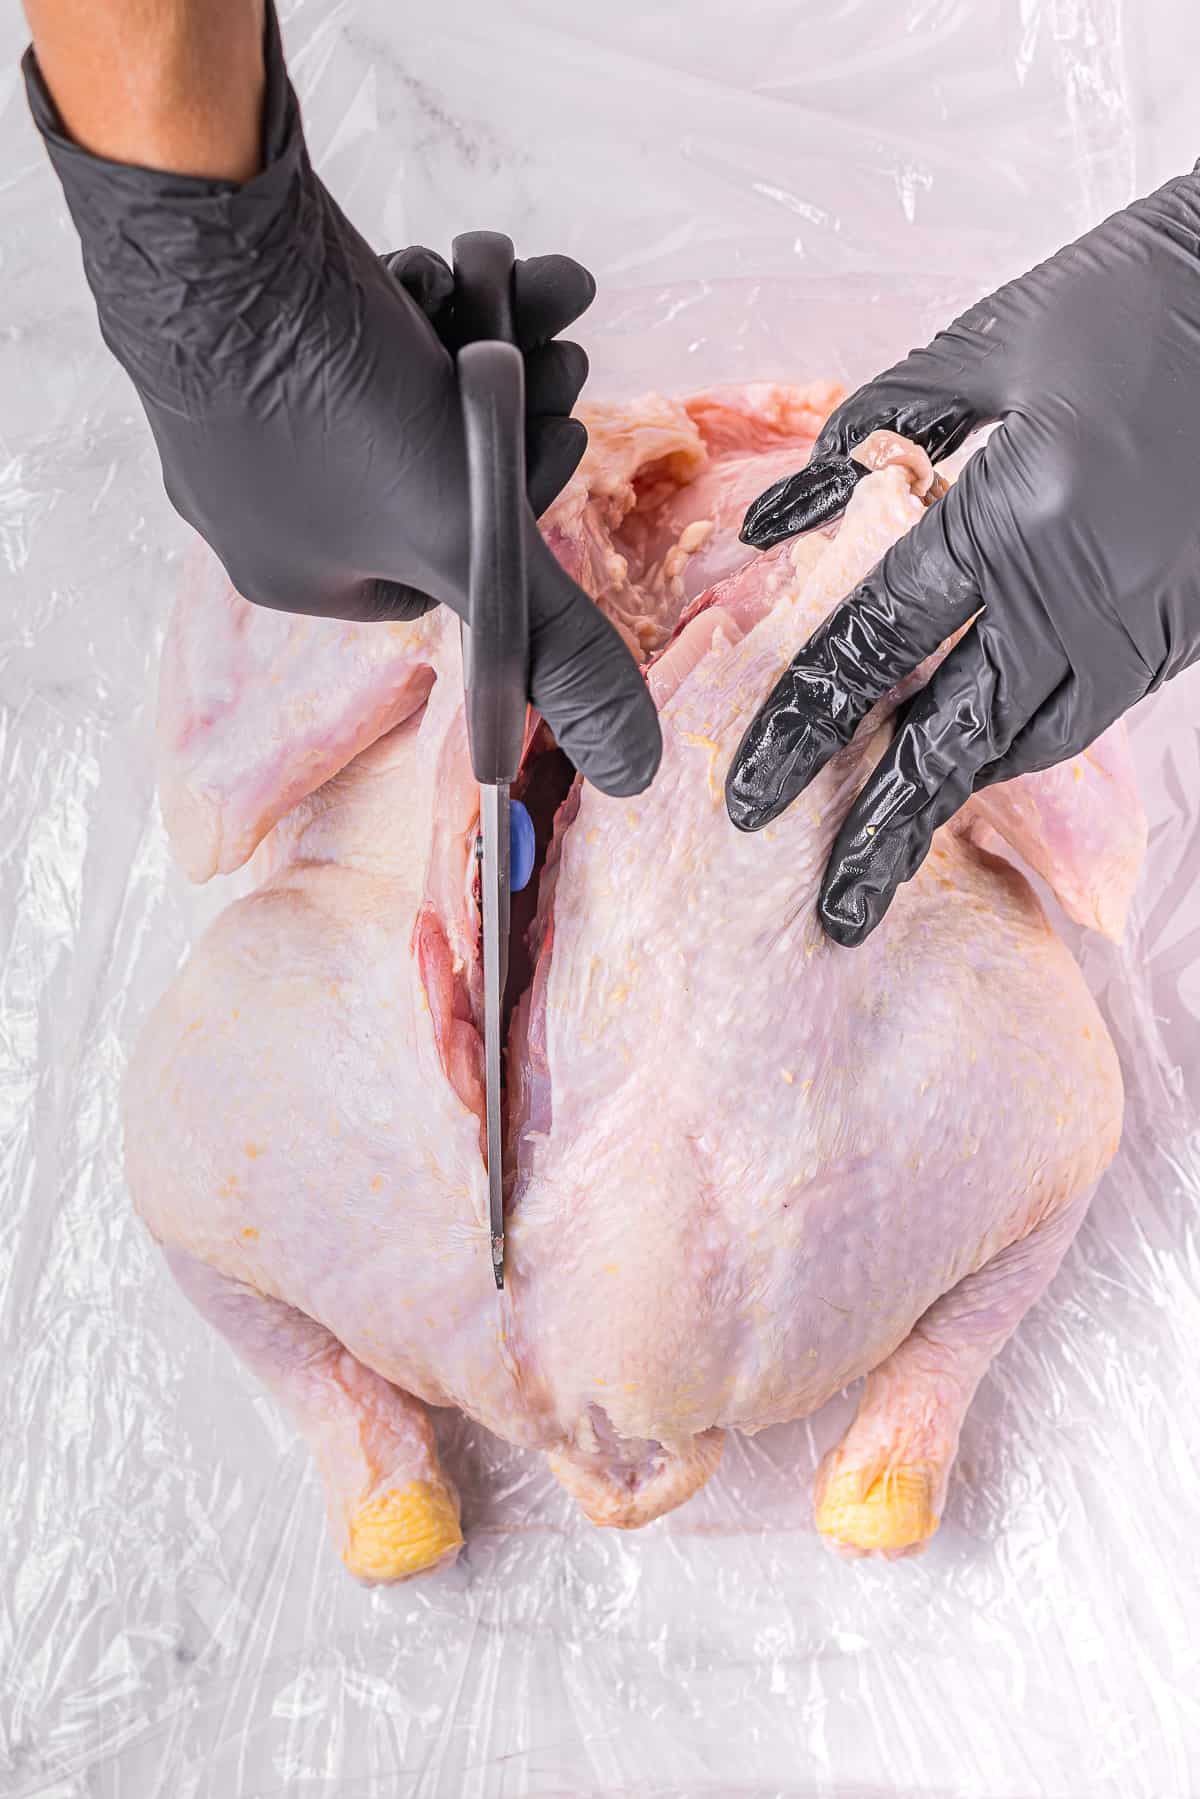 Using sharp kitchen shears to cut down back of whole chicken.